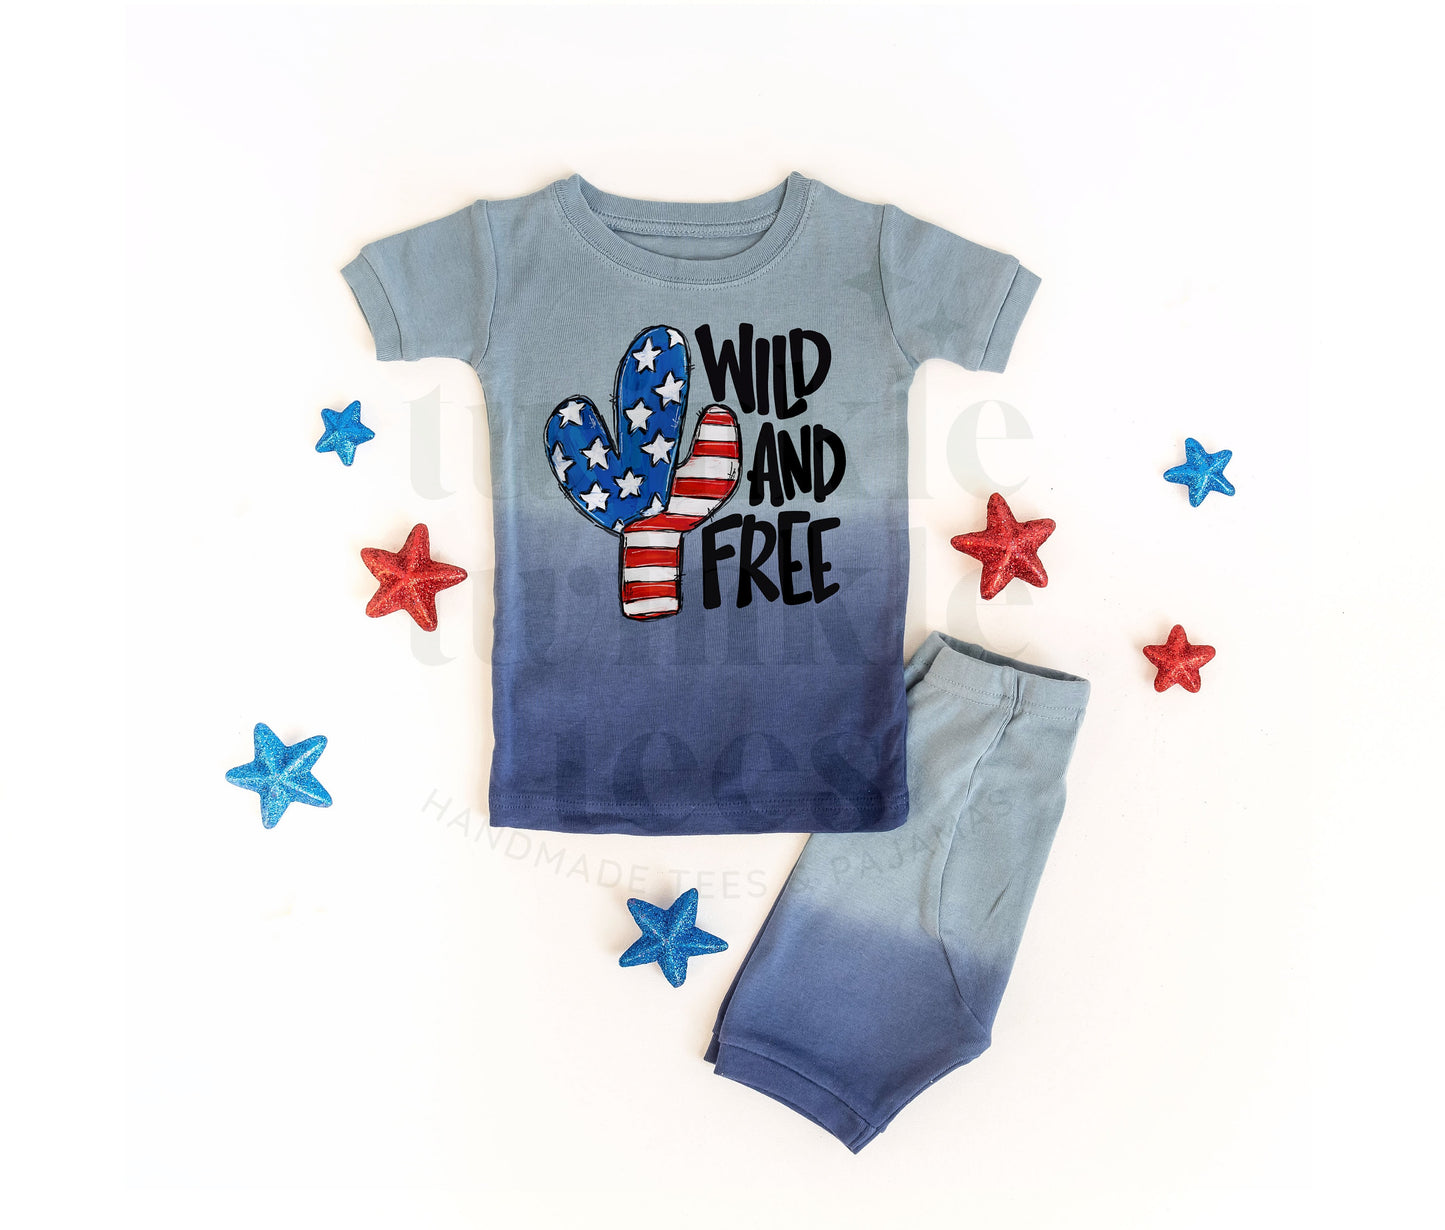 Wild and Free Cactus Blue Ombre Shorts Set for Kids - Kids 4th of July Set - 4th of July Toddler Shirt and Shorts